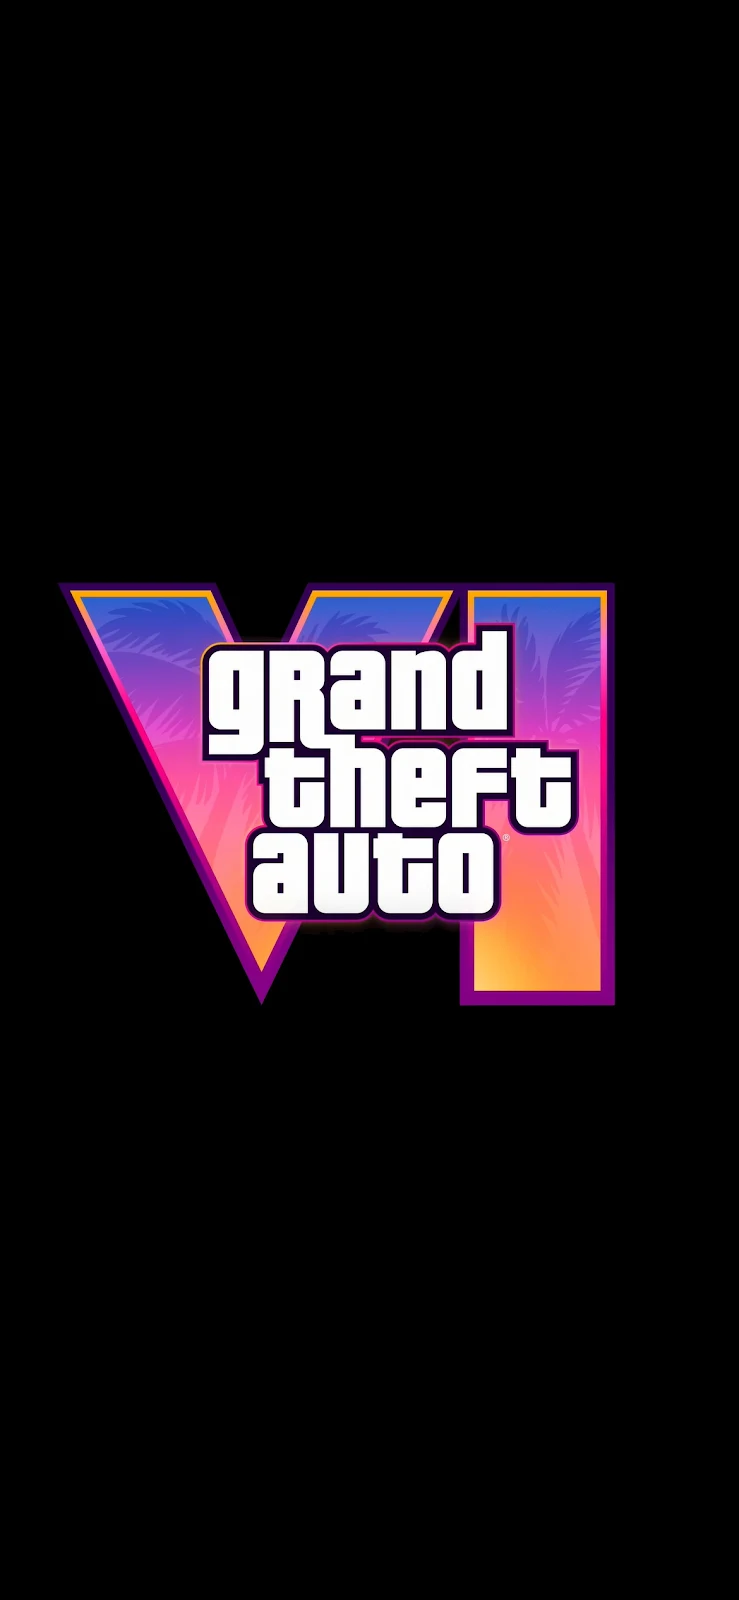 A Cool Grand Theft Auto Vi, Gta 6, Black, Logo Full HD iPhone Wallpaper for Free Download in High Quality [1170x2532]